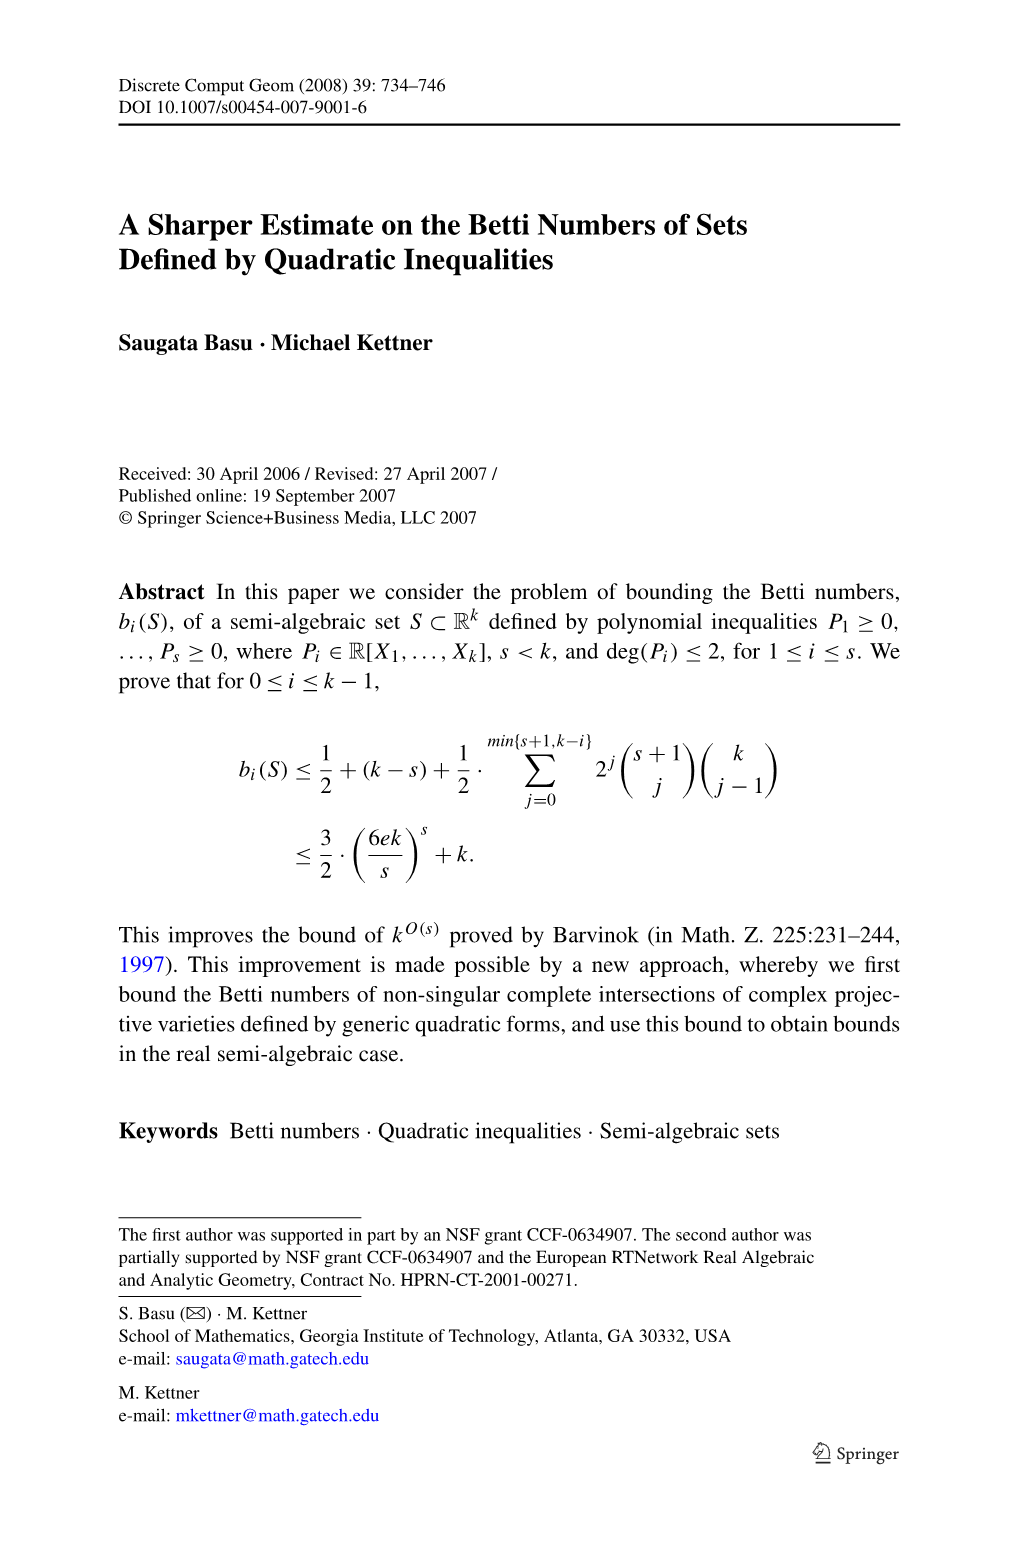 A Sharper Estimate on the Betti Numbers of Sets Defined By